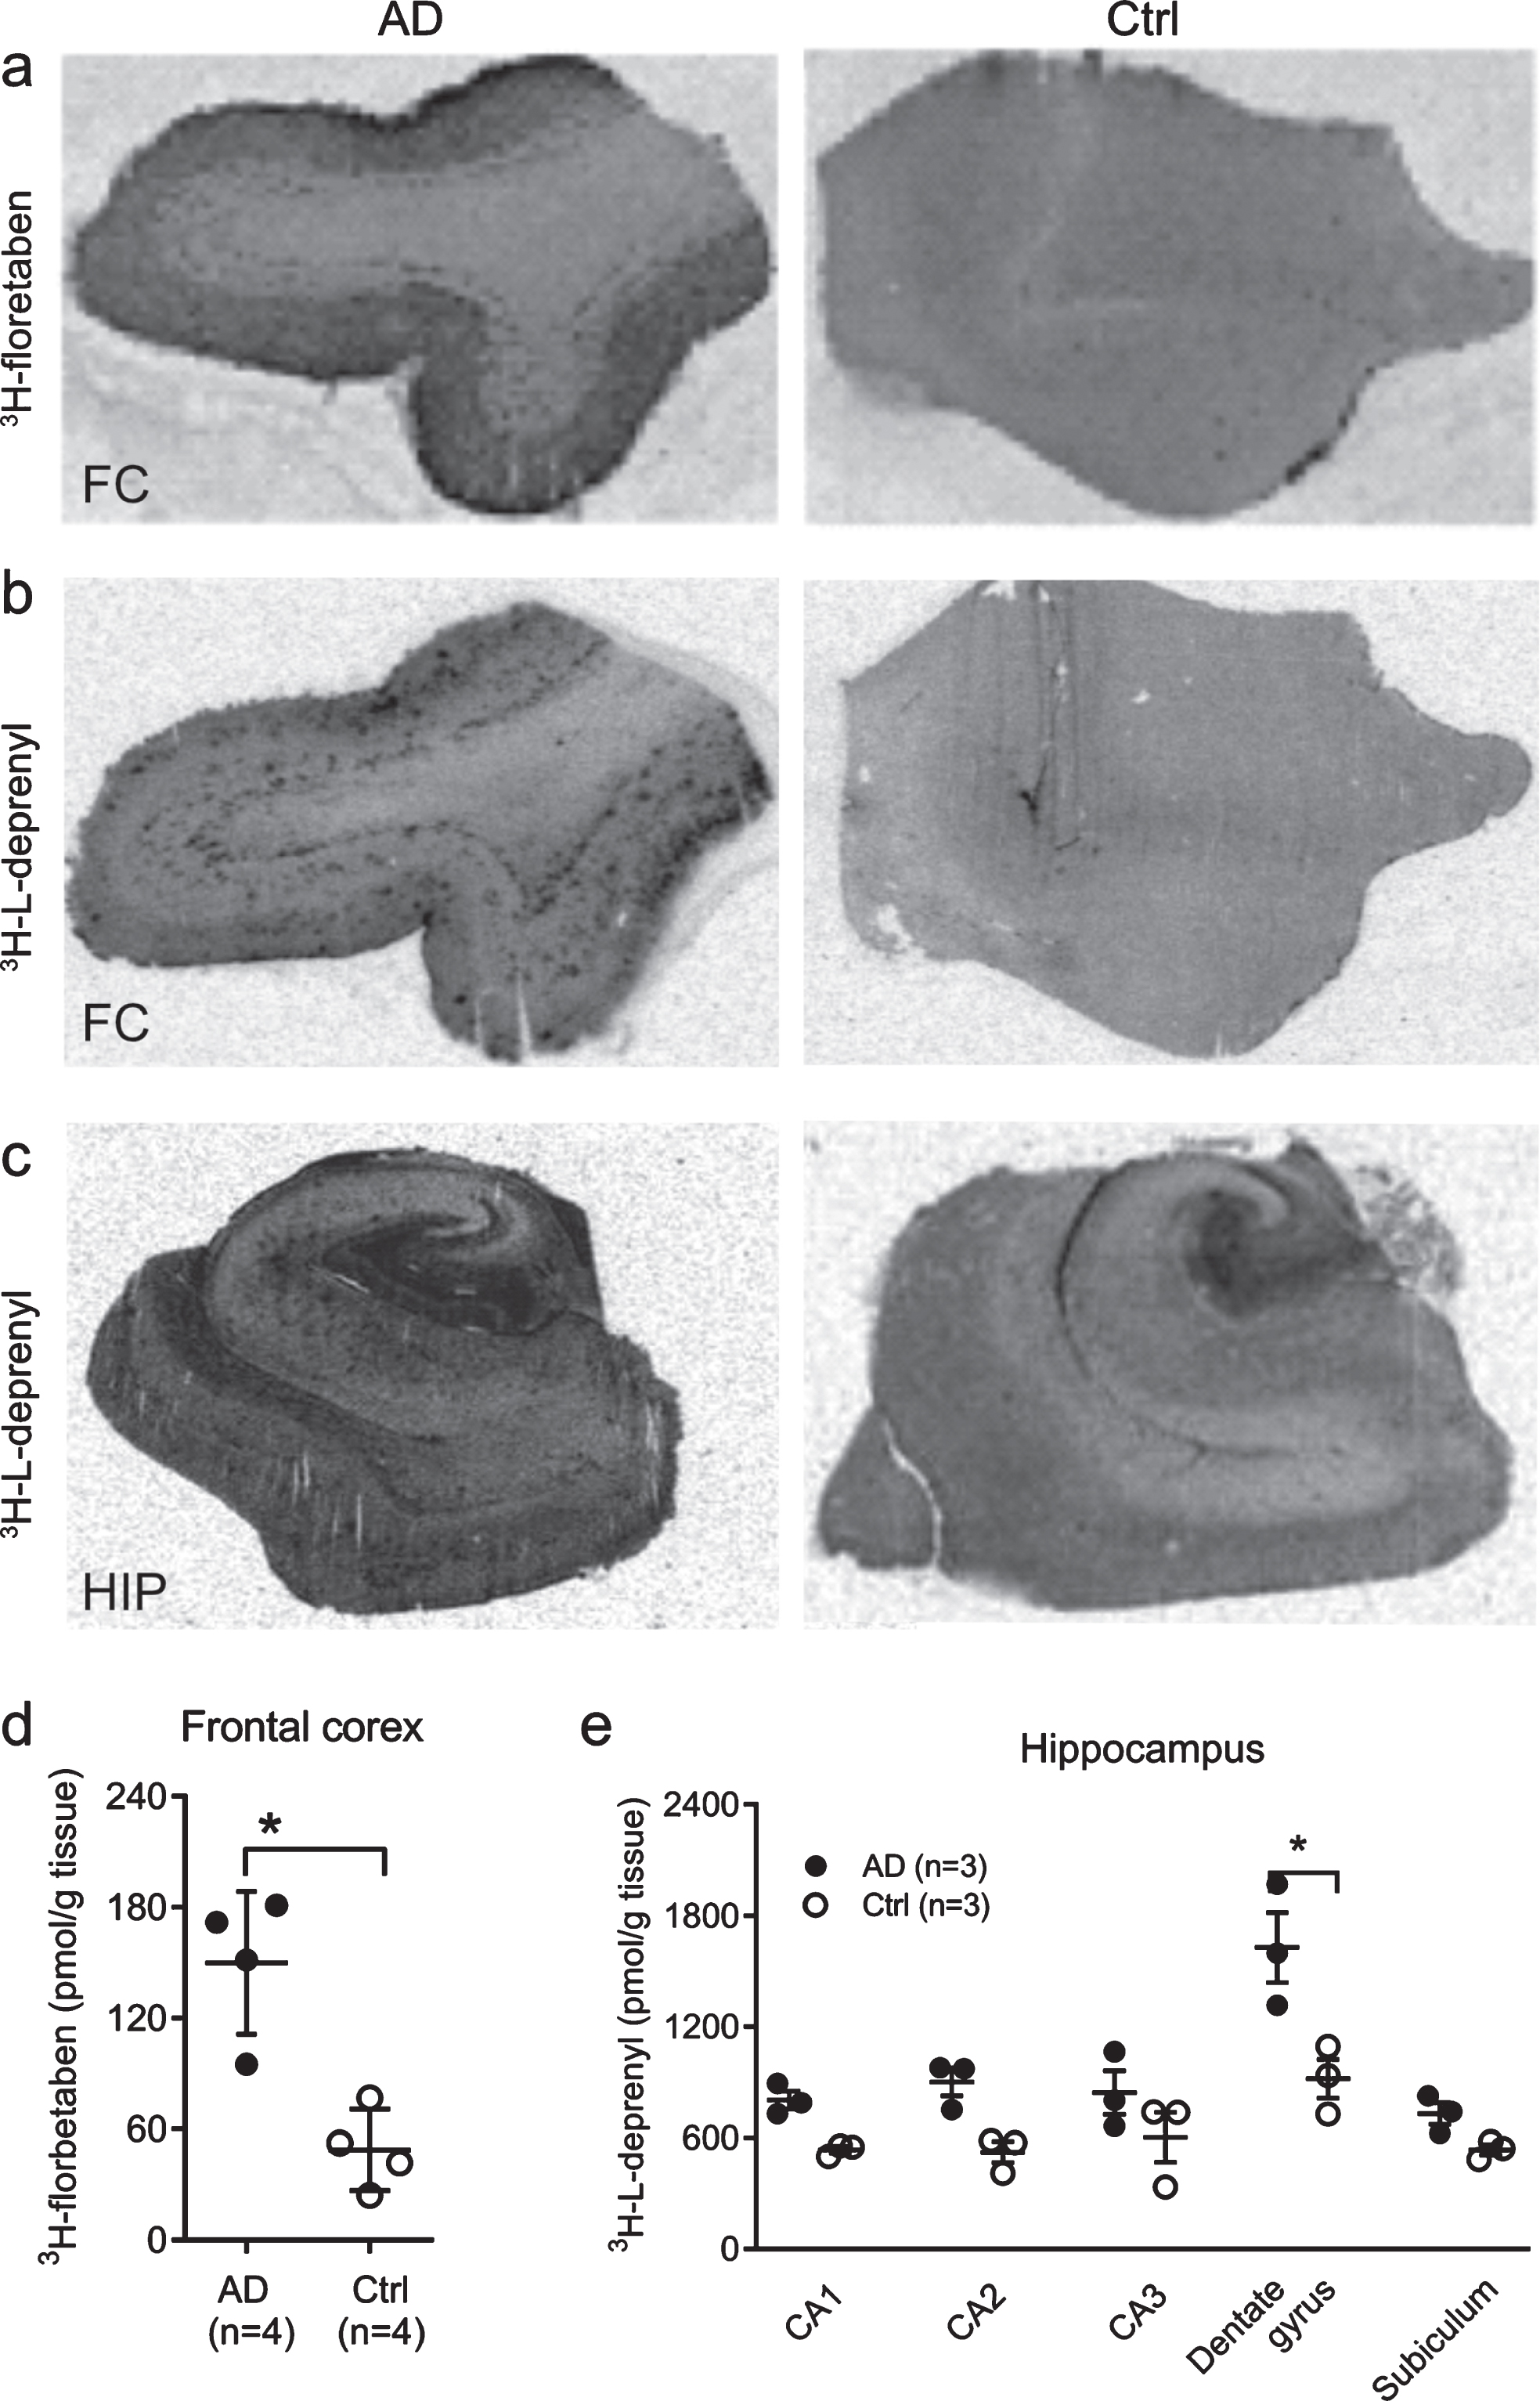 Autoradiography using 3H-florbetaben and 3H-L-deprenyl in AD and control brain. Autoradiography and quantification in AD (n = 3) and control cases (n = 3), using (a, d) 3H-florbetaben (5 nM) in the frontal cortex slices; (b-c, e) using 3H-L-deprenyl (10 nM) in the frontal cortex and the hippocampus slices; Significant differences between AD and control groups are indicated by *p < 0.05.